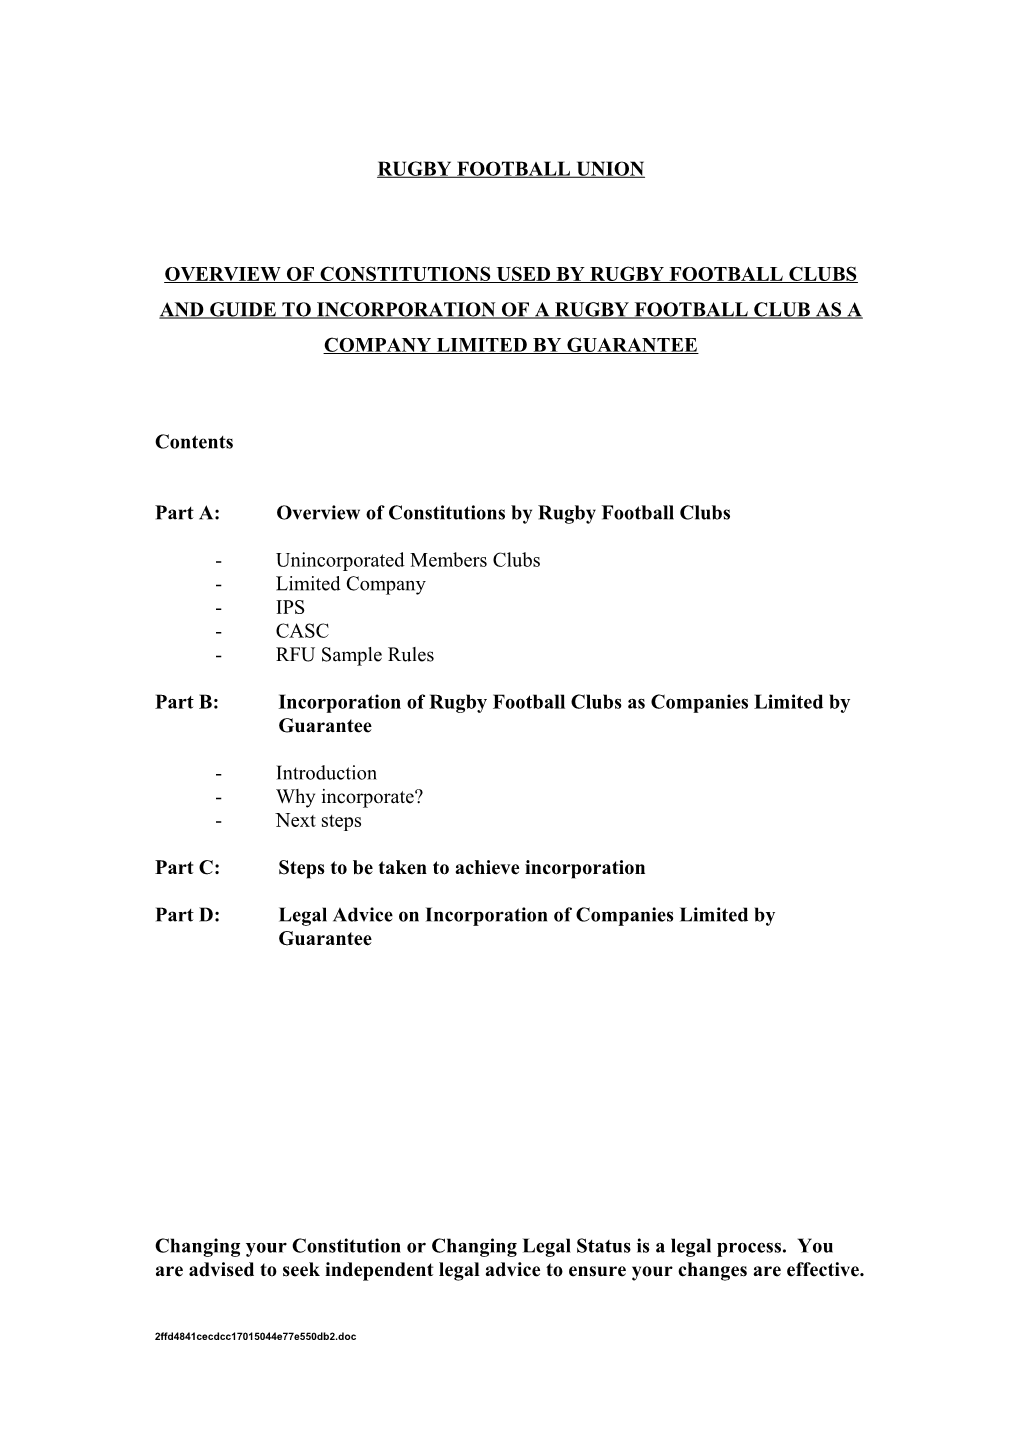 Part A: Overview of Constitutions by Rugby Football Clubs